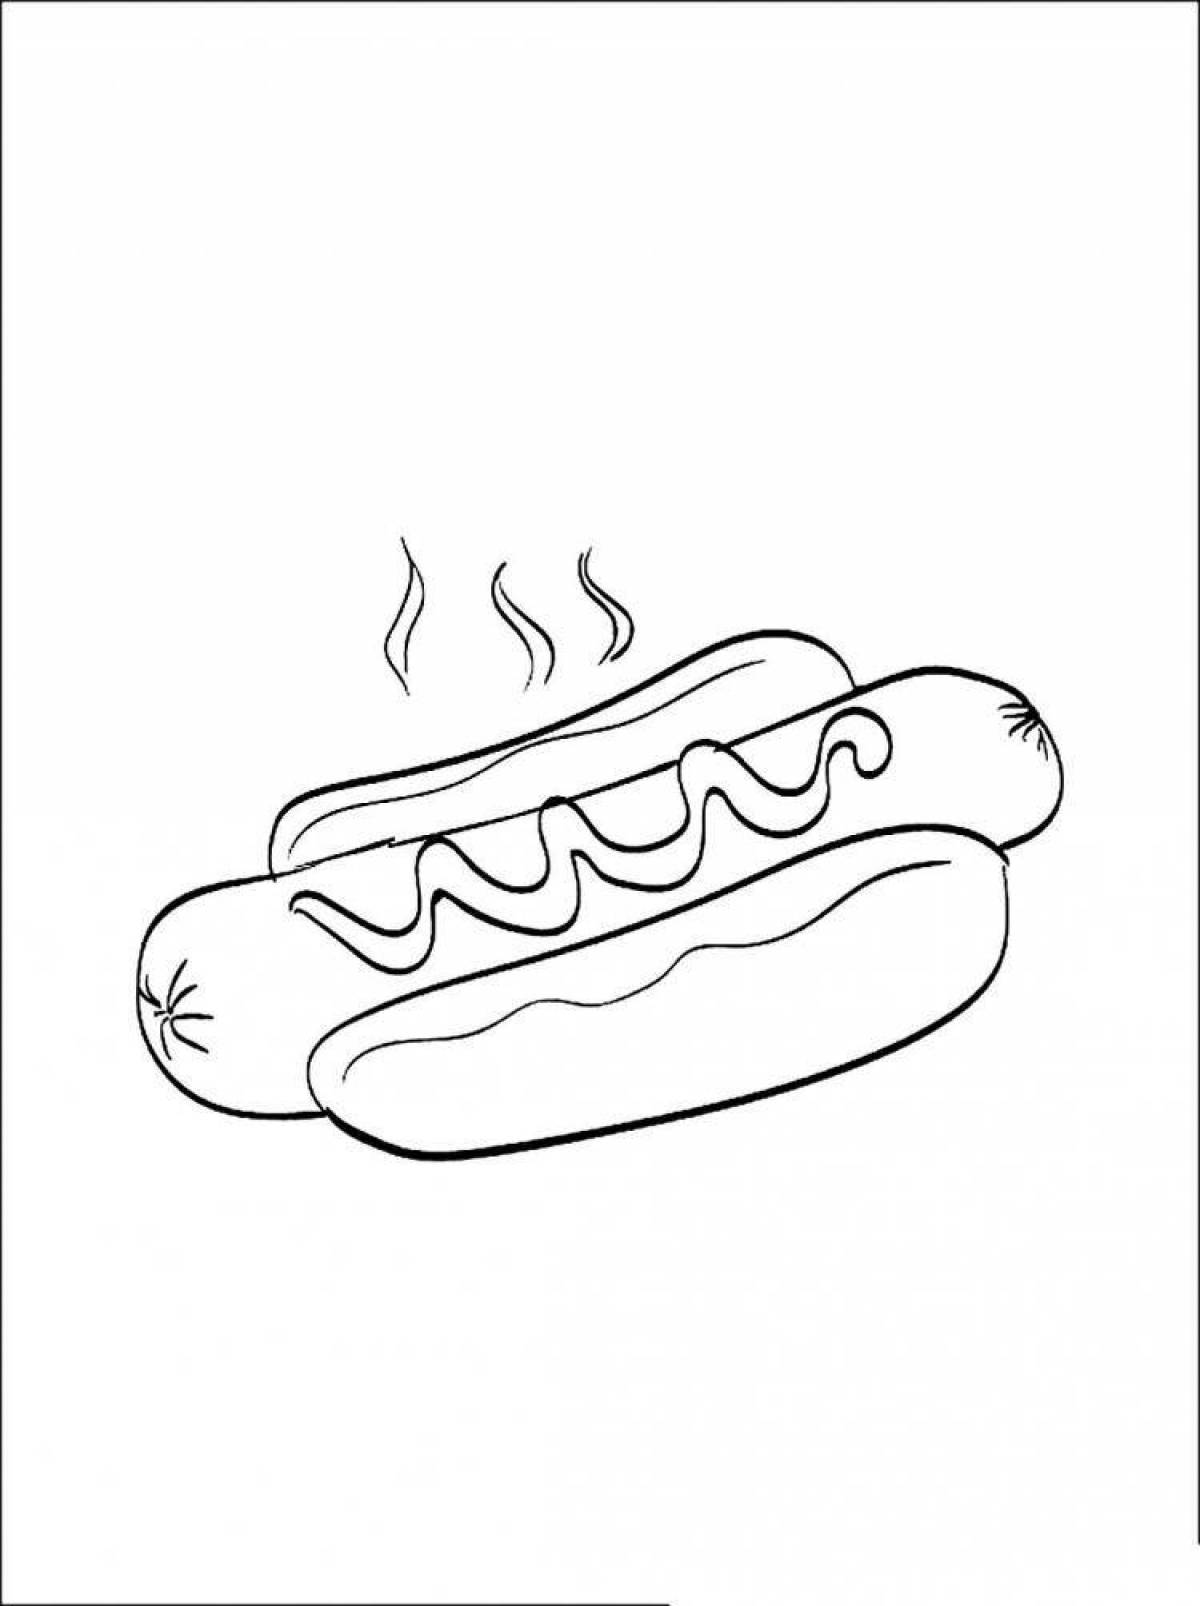 Coloring page spectacular hot dog